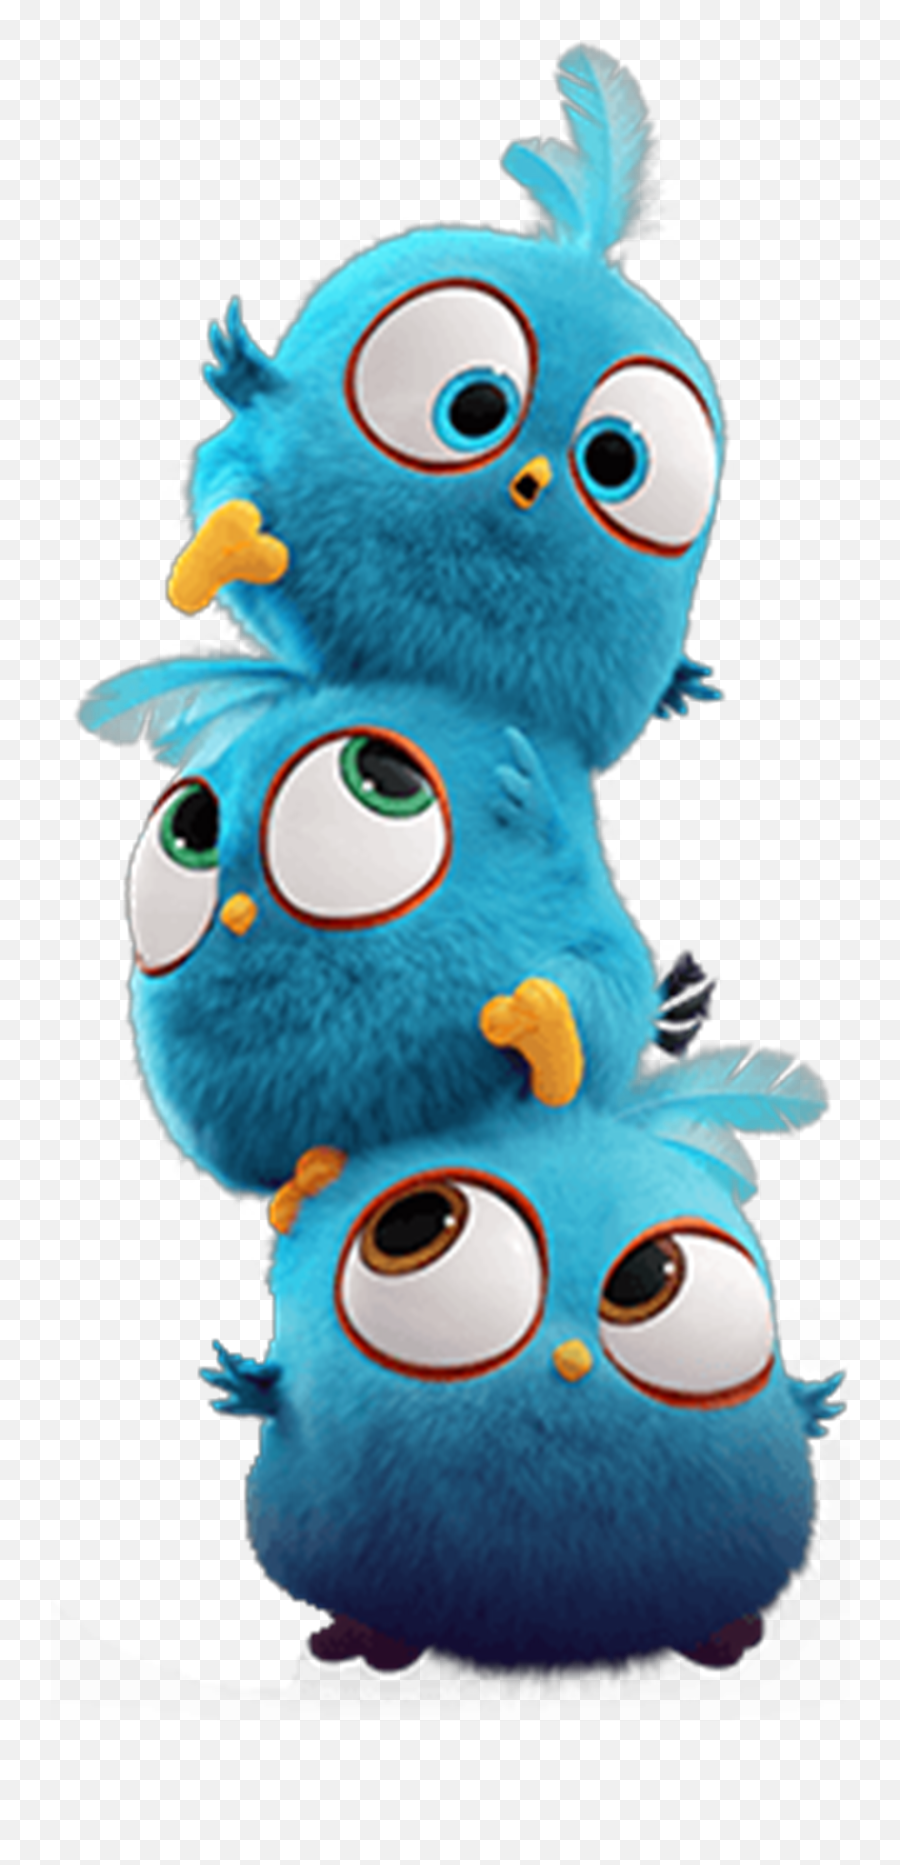 Cute Bird Png - Cute Bird Cartoon Delivering Letter Ilration Angry Birds  Blues,Blue Bird Png - free transparent png images 